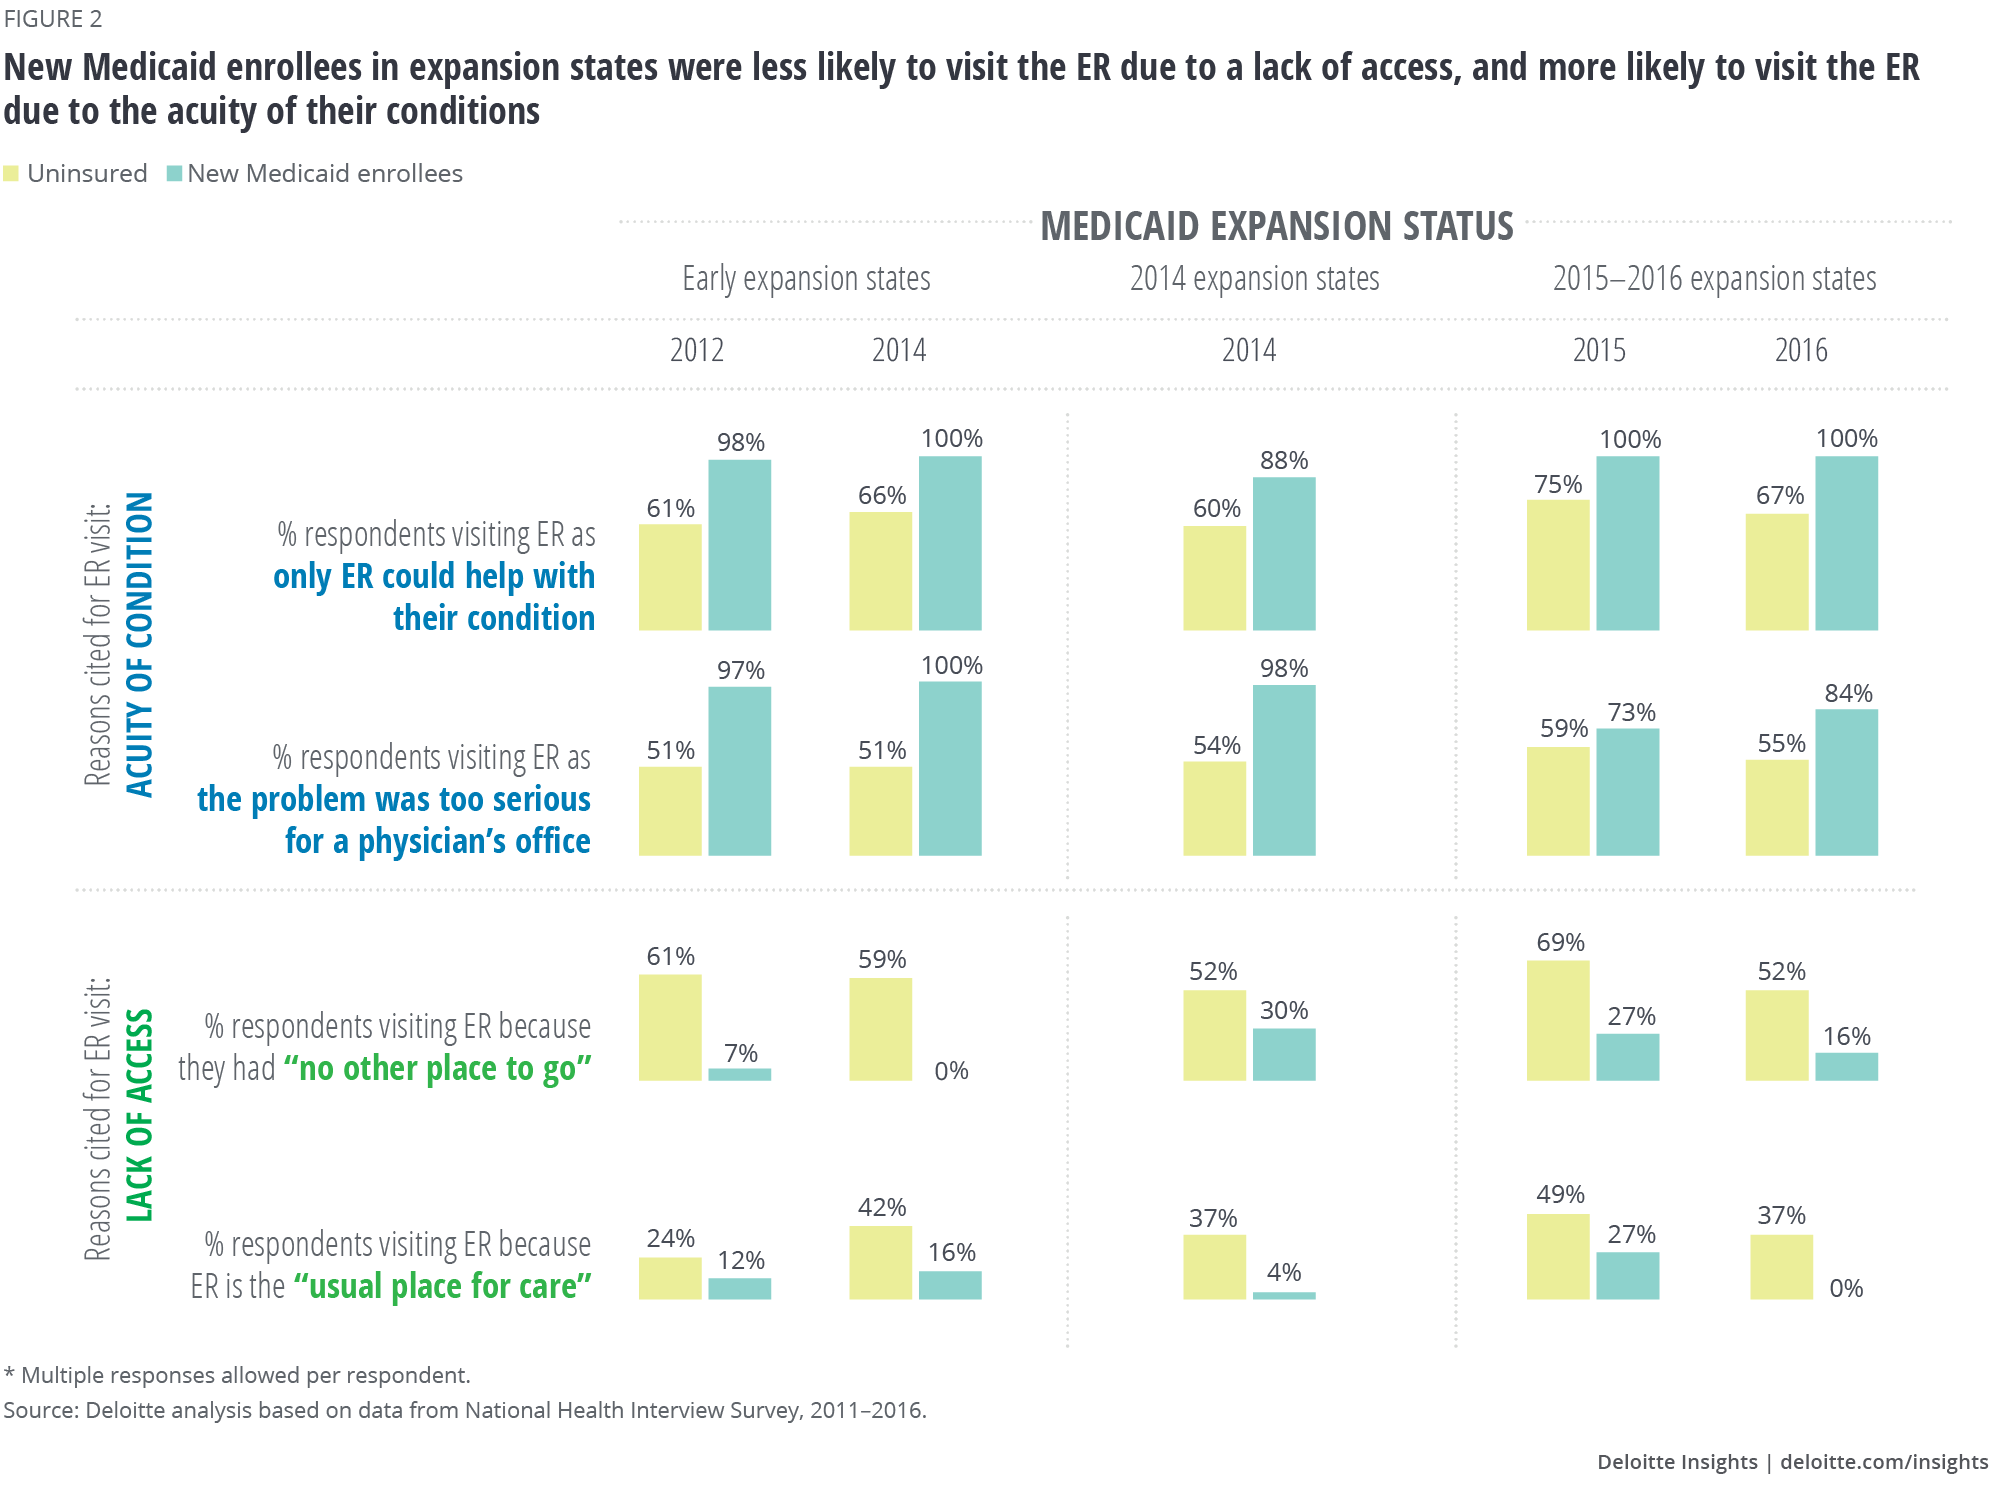 New Medicaid enrollees in expansion states were less likely to visit the ER due to a lack of access, and more likely to visit the ER due to the acuity of their conditions